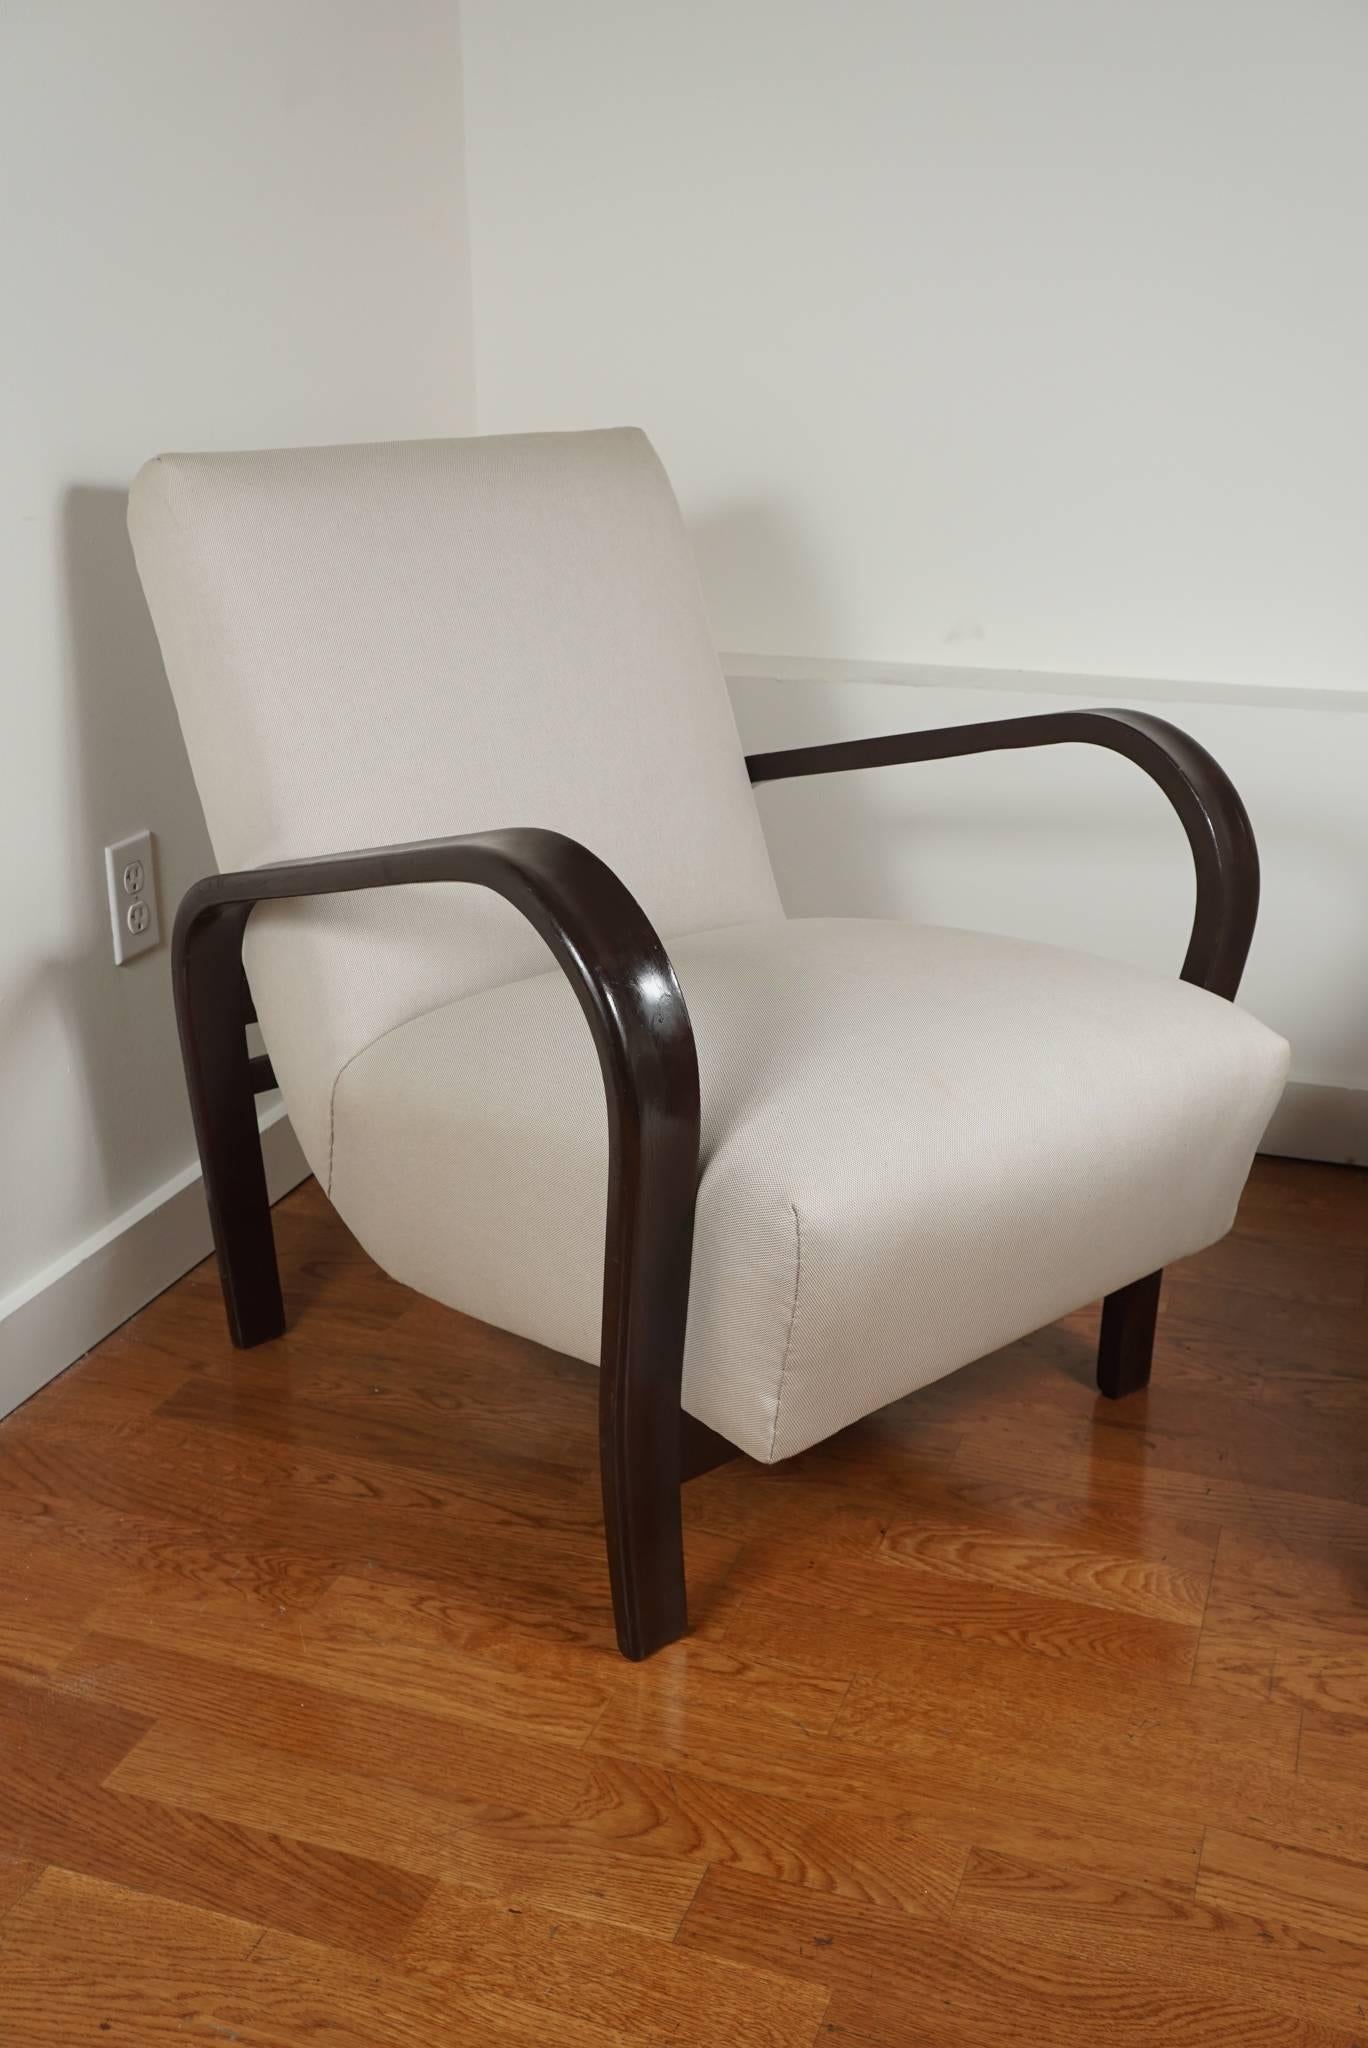 A pair of vintage, ebony wood, armchairs, newly upholstered in our favourite, oatmeal linen fabric.
All set to go!